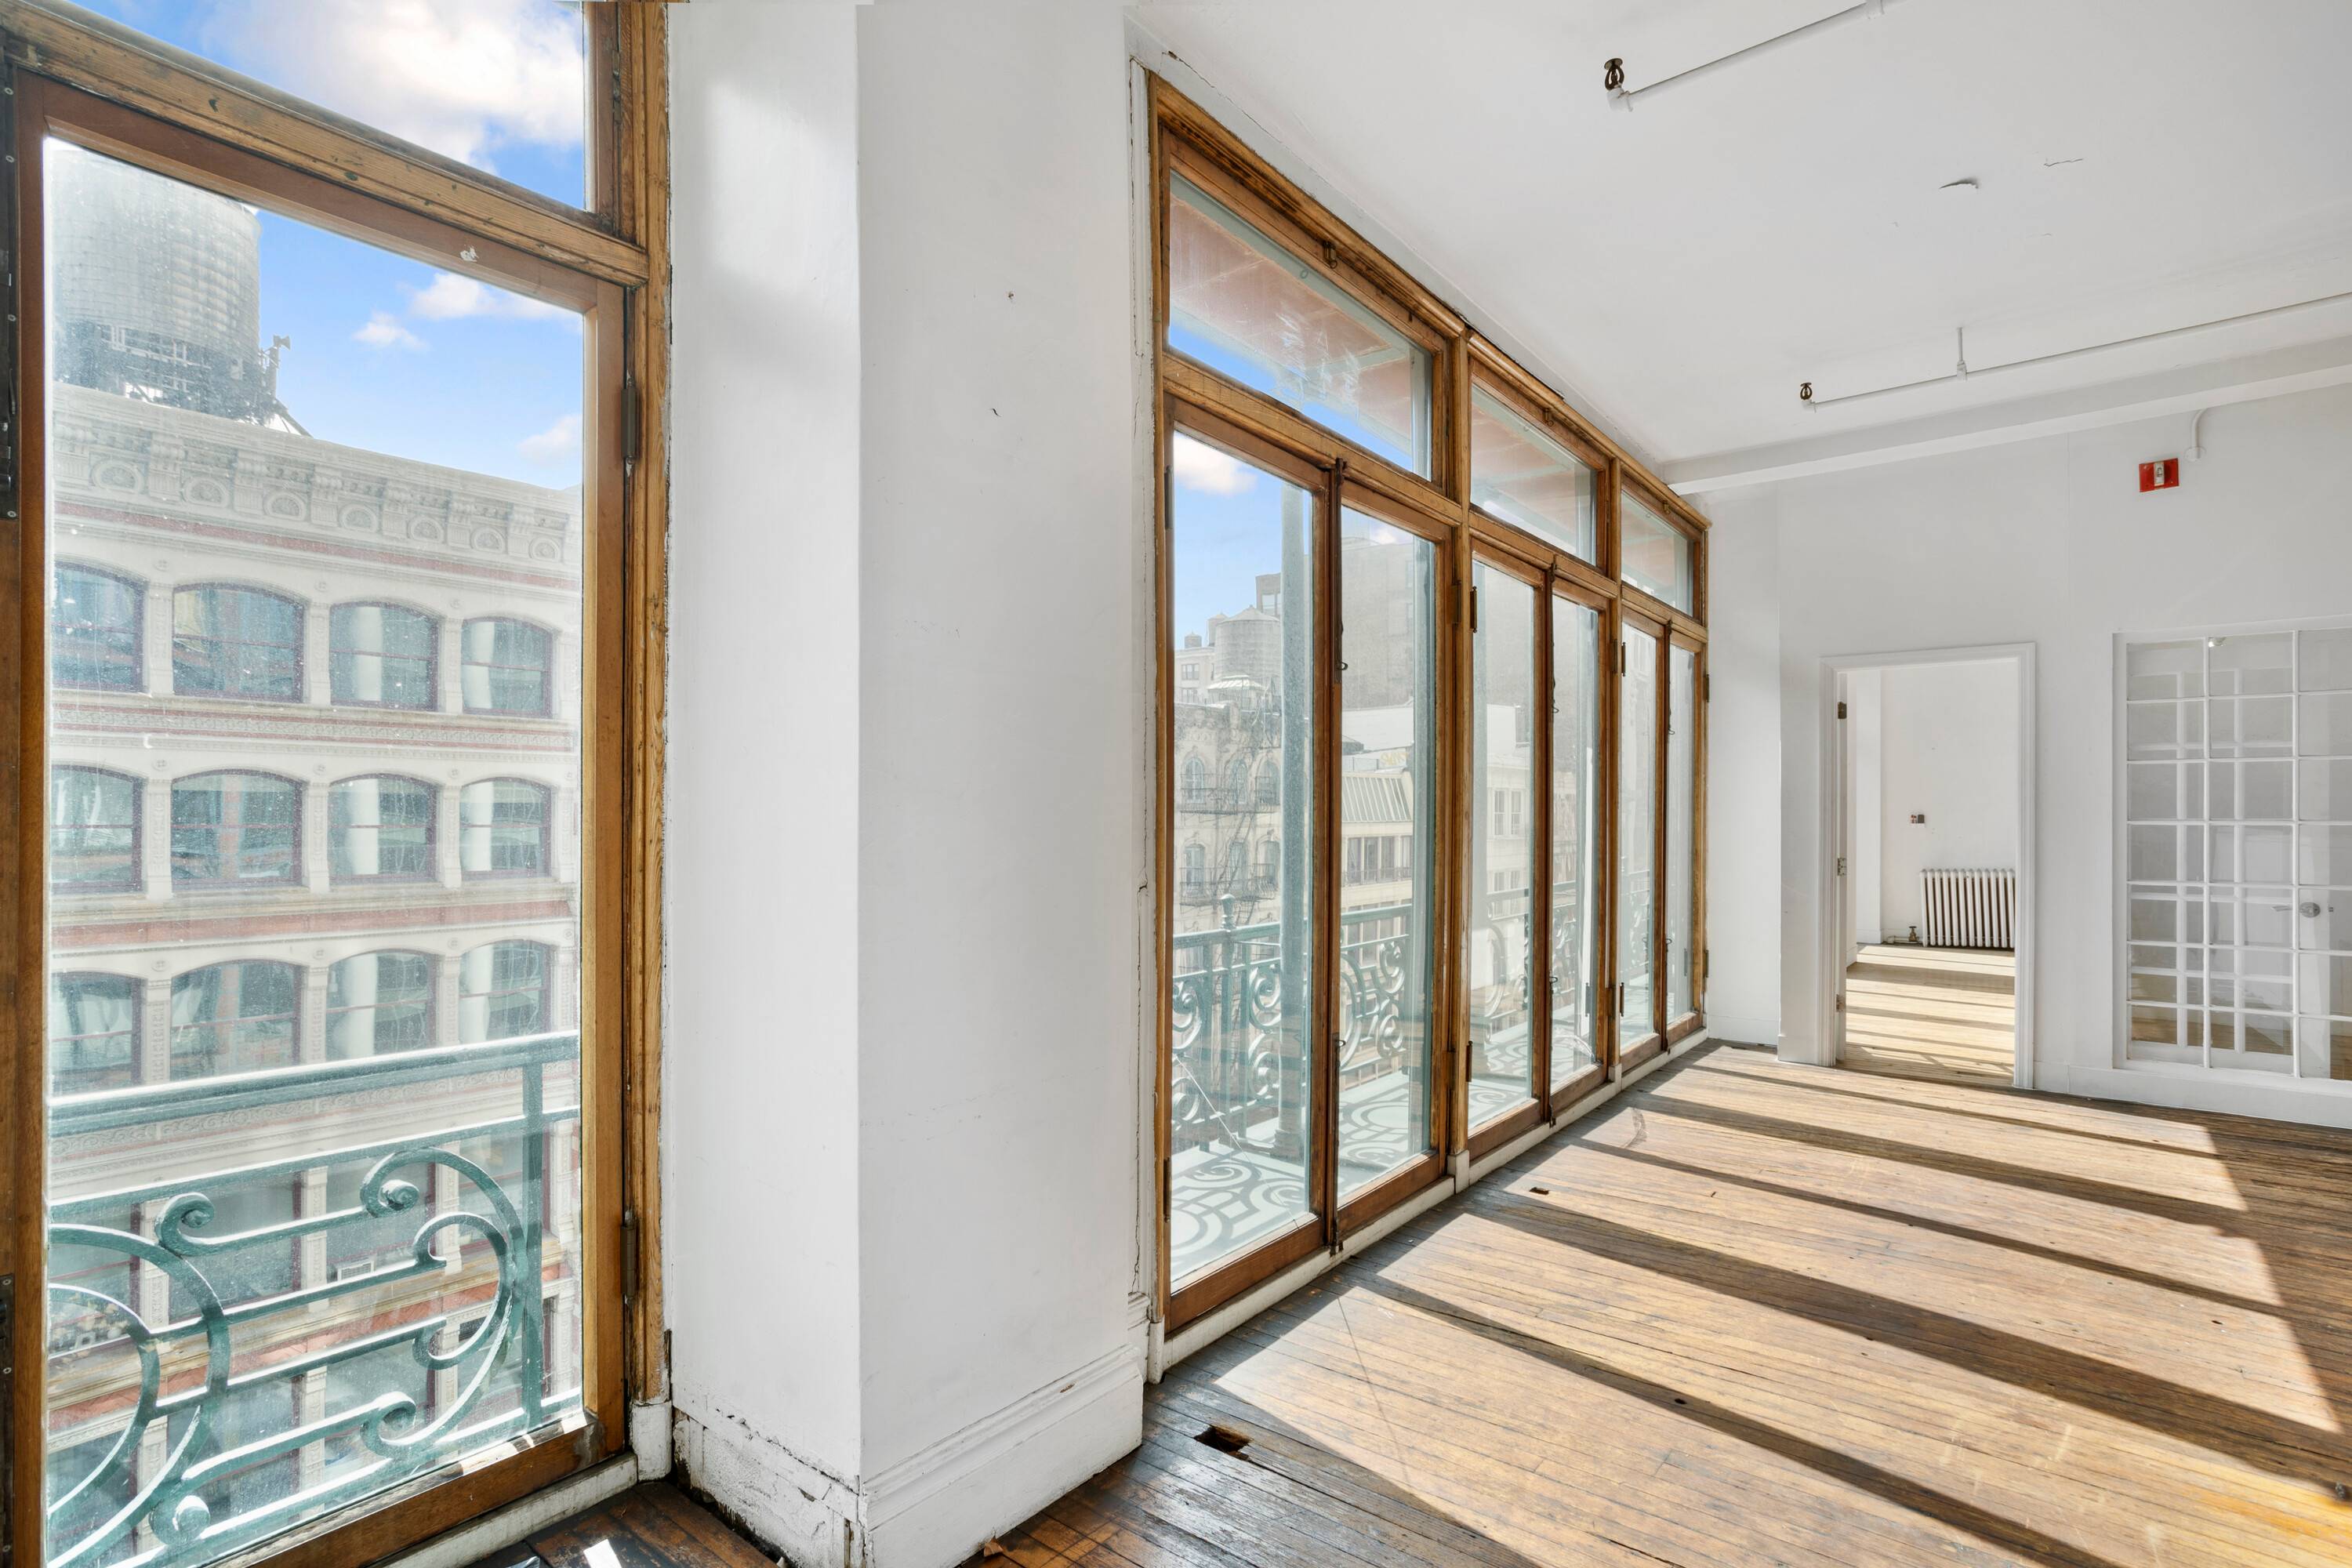 raw SOHO LOFT Offering - $5.75mm 8,016 sq ft commercial / retail, live / work space in prime Soho - 561 Broadway AKA 88 Prince Street